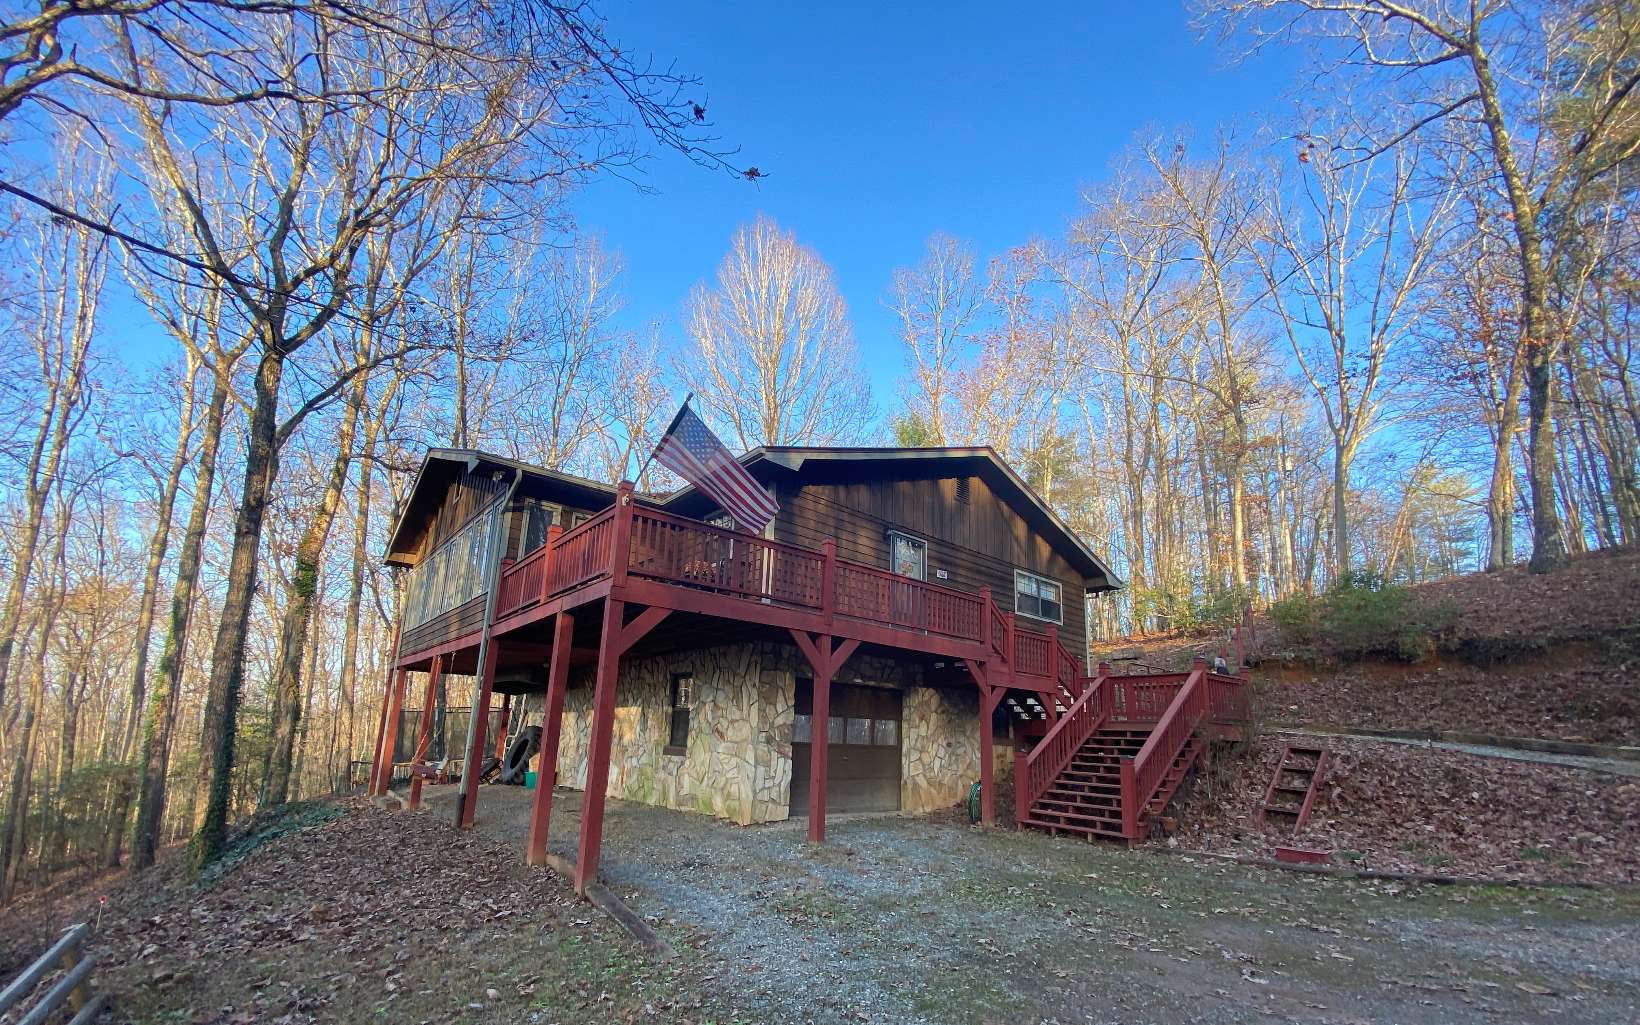 Affordable 3/3 in the Perfect Location. "Cabin Style" w/City Water, Less than 5 mi from Blue Ridge & under 2 mi to Fannin Hospital. Wood Lap Siding w/Board & Batten Gables, 4-Sided Rock Foundation, Metal Roof & Pull Under Garage/Workshop. Updated Wood Engineered Floors, Newer HVAC (2018) & Raised "Arch-top" Panel Interior Doors. Spacious Kitchen w/Tile Backsplash. Large Counter Bar opens into Dining Area. Extended Sunroom & Bonus Rm w/Casement (Crank-out) Windows. ROCK ACCENT WALL in LR w/Wood-Burning Fireplace (Tall Stone "Sitting Hearth"). Master Suite w/Private Bath (Full Shower Enclosure & upgraded vanity). Guest Rm & Hall Bath (Upgraded Vanity & Shower Enclosure).Terrace Level features 3rd Bdrm/3rd Full Bath (Clawfoot tub) & Laundry Area (Woodstove). Seasonal Views of the Cohutta Wilderness. Large Back & Side Yard for Gardens, Pets etc. Driveways to Both Levels. Adjoining Lot Available. All Paved Access